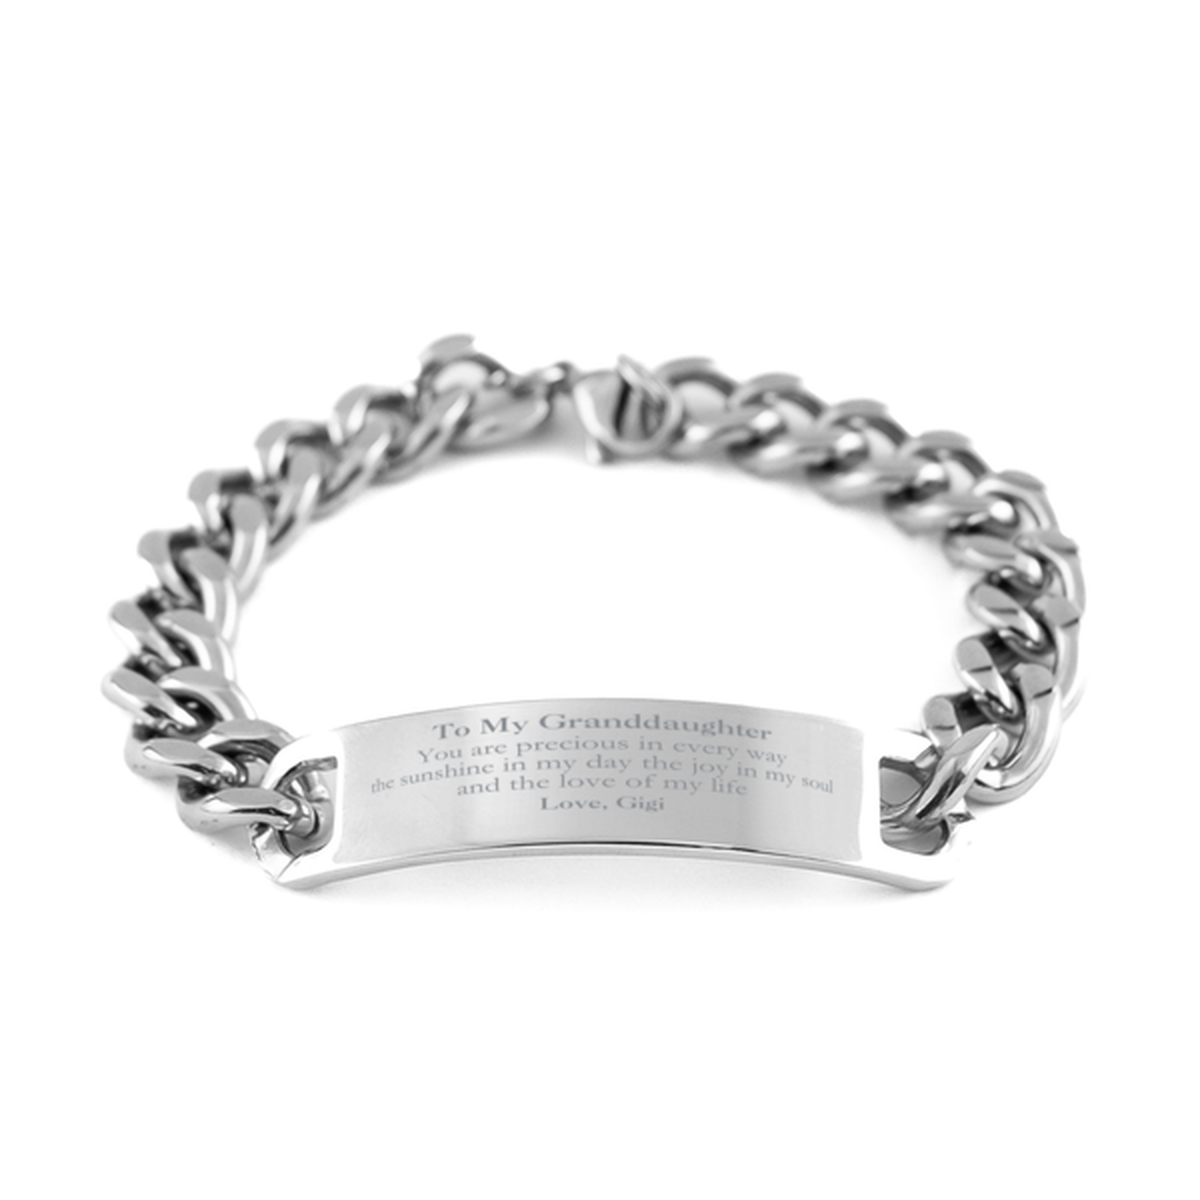 Graduation Gifts for Granddaughter Cuban Chain Stainless Steel Bracelet Present from Gigi, Christmas Granddaughter Birthday Gifts Granddaughter You are precious in every way the sunshine in my day. Love, Gigi